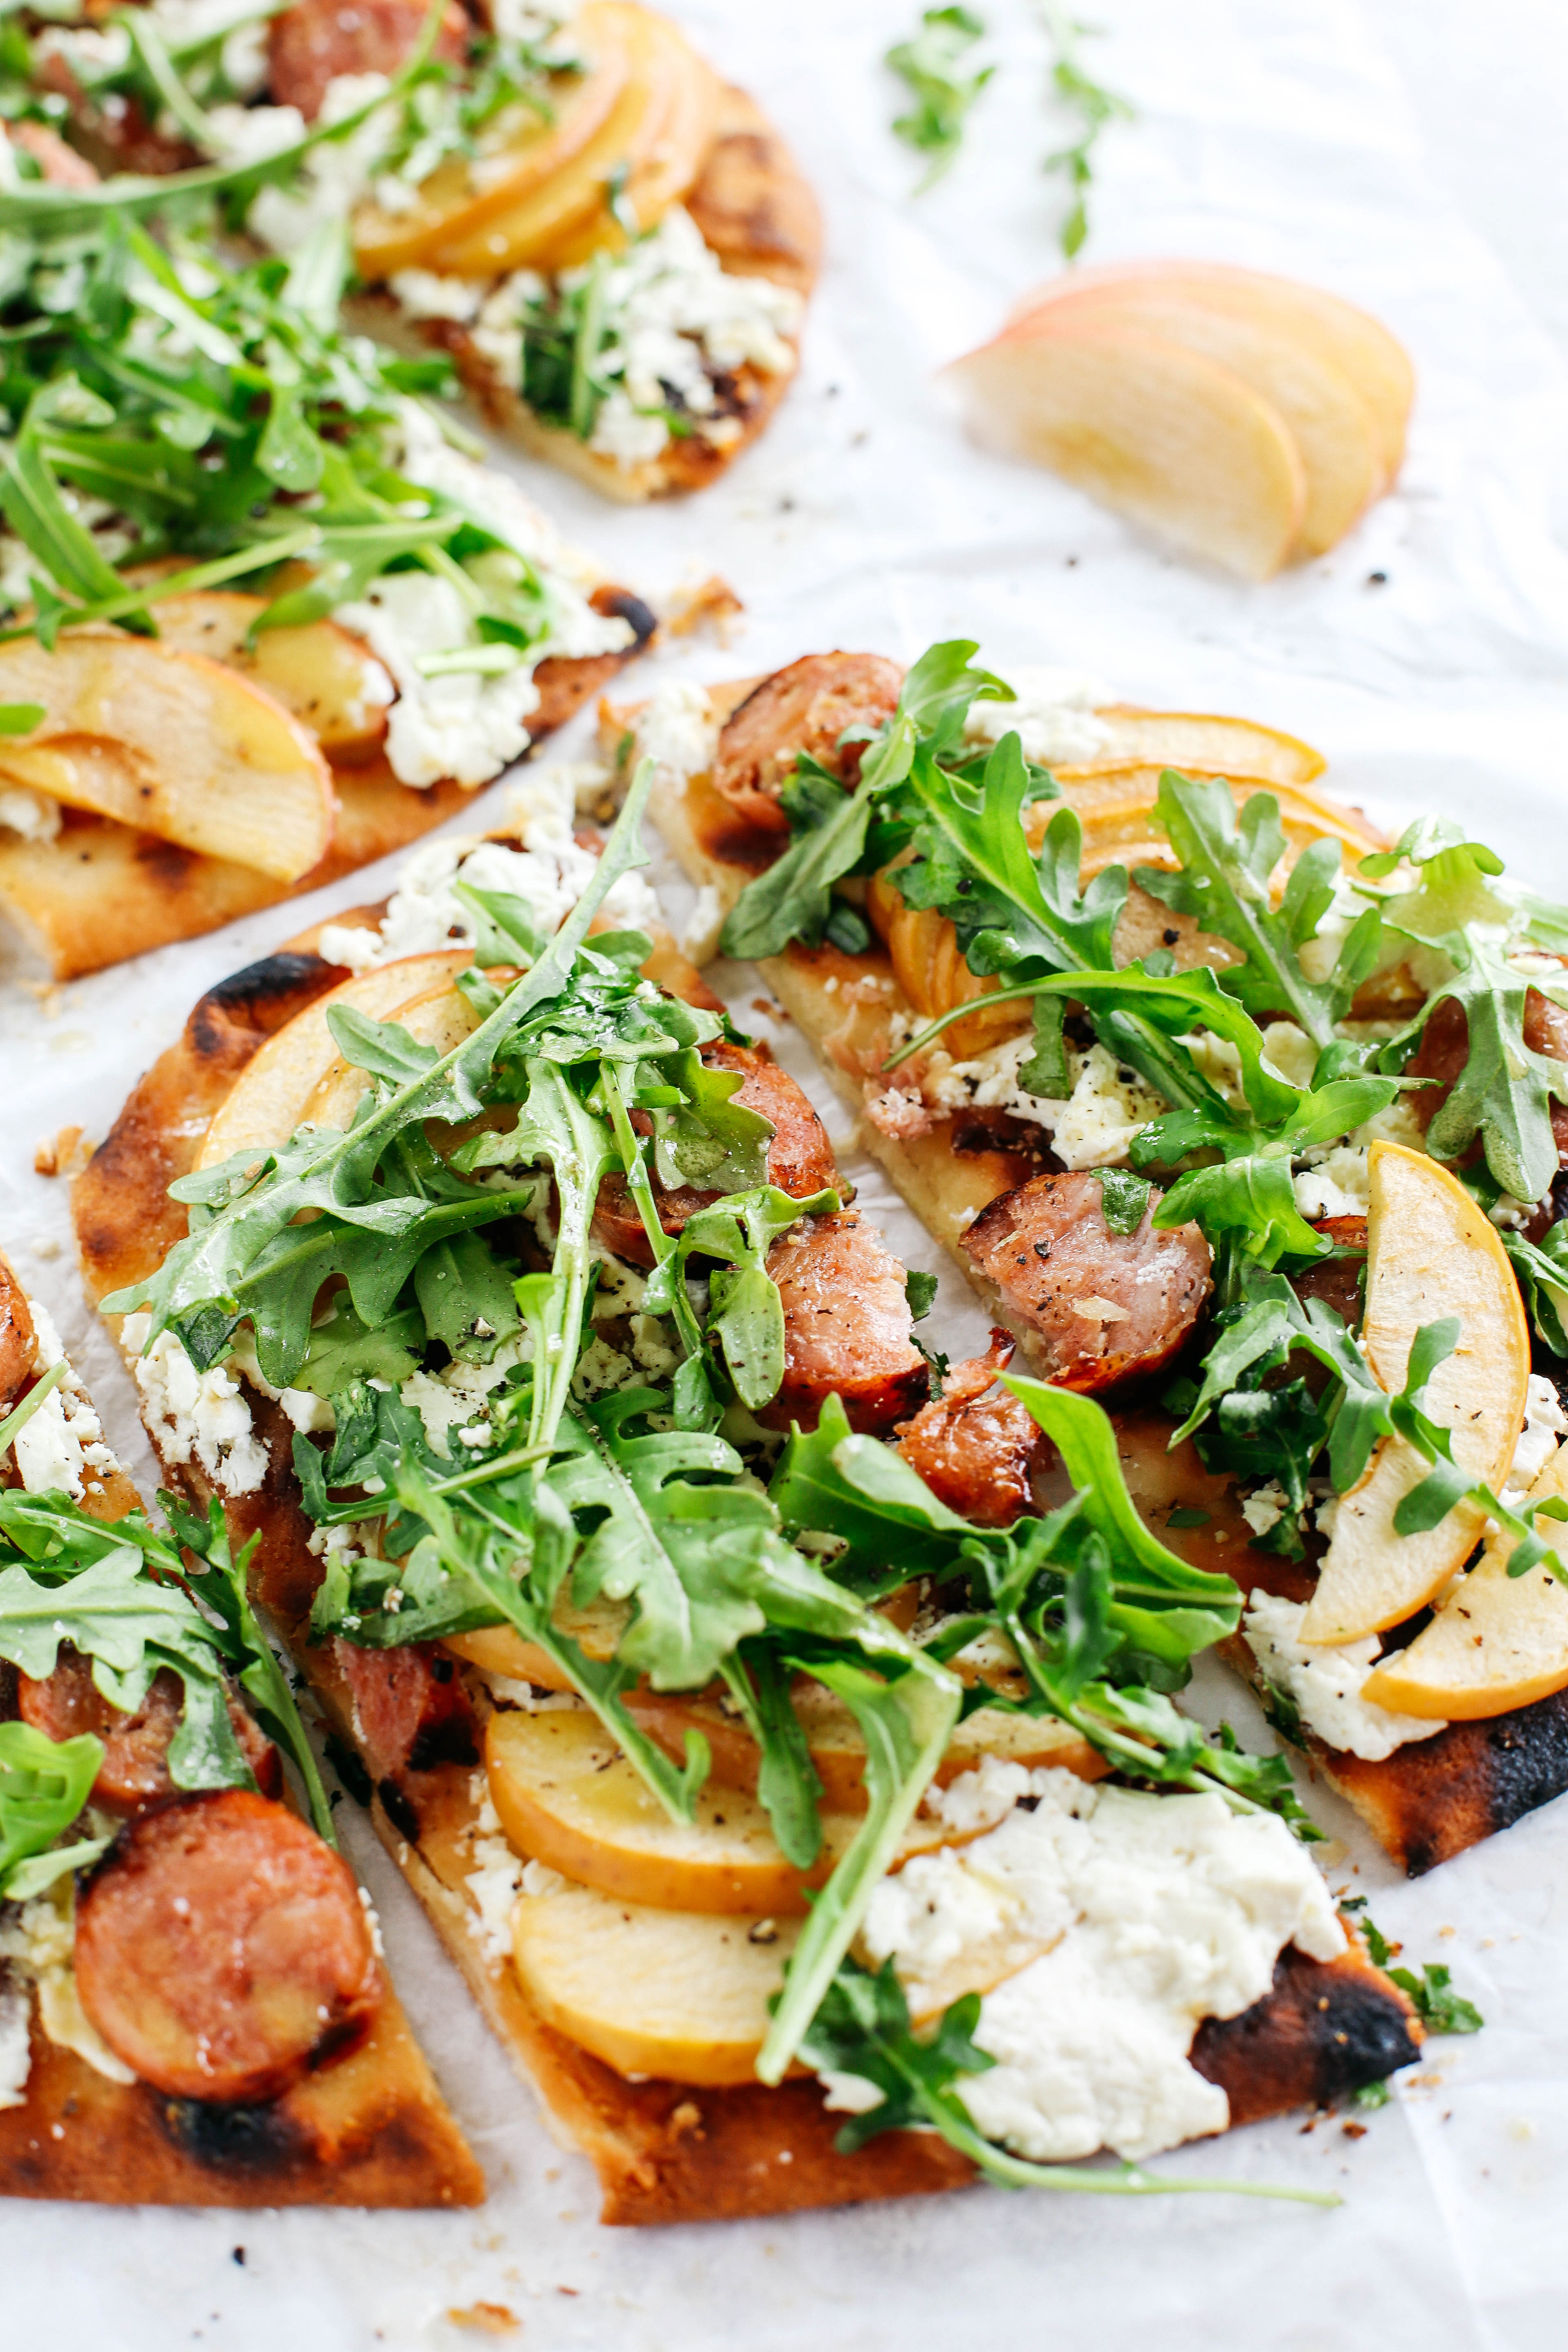 Kick off the summer with this Grilled Sausage & Apple Pizza with Goat Cheese that combines your favorite sweet and savory flavors into one delicious meal!